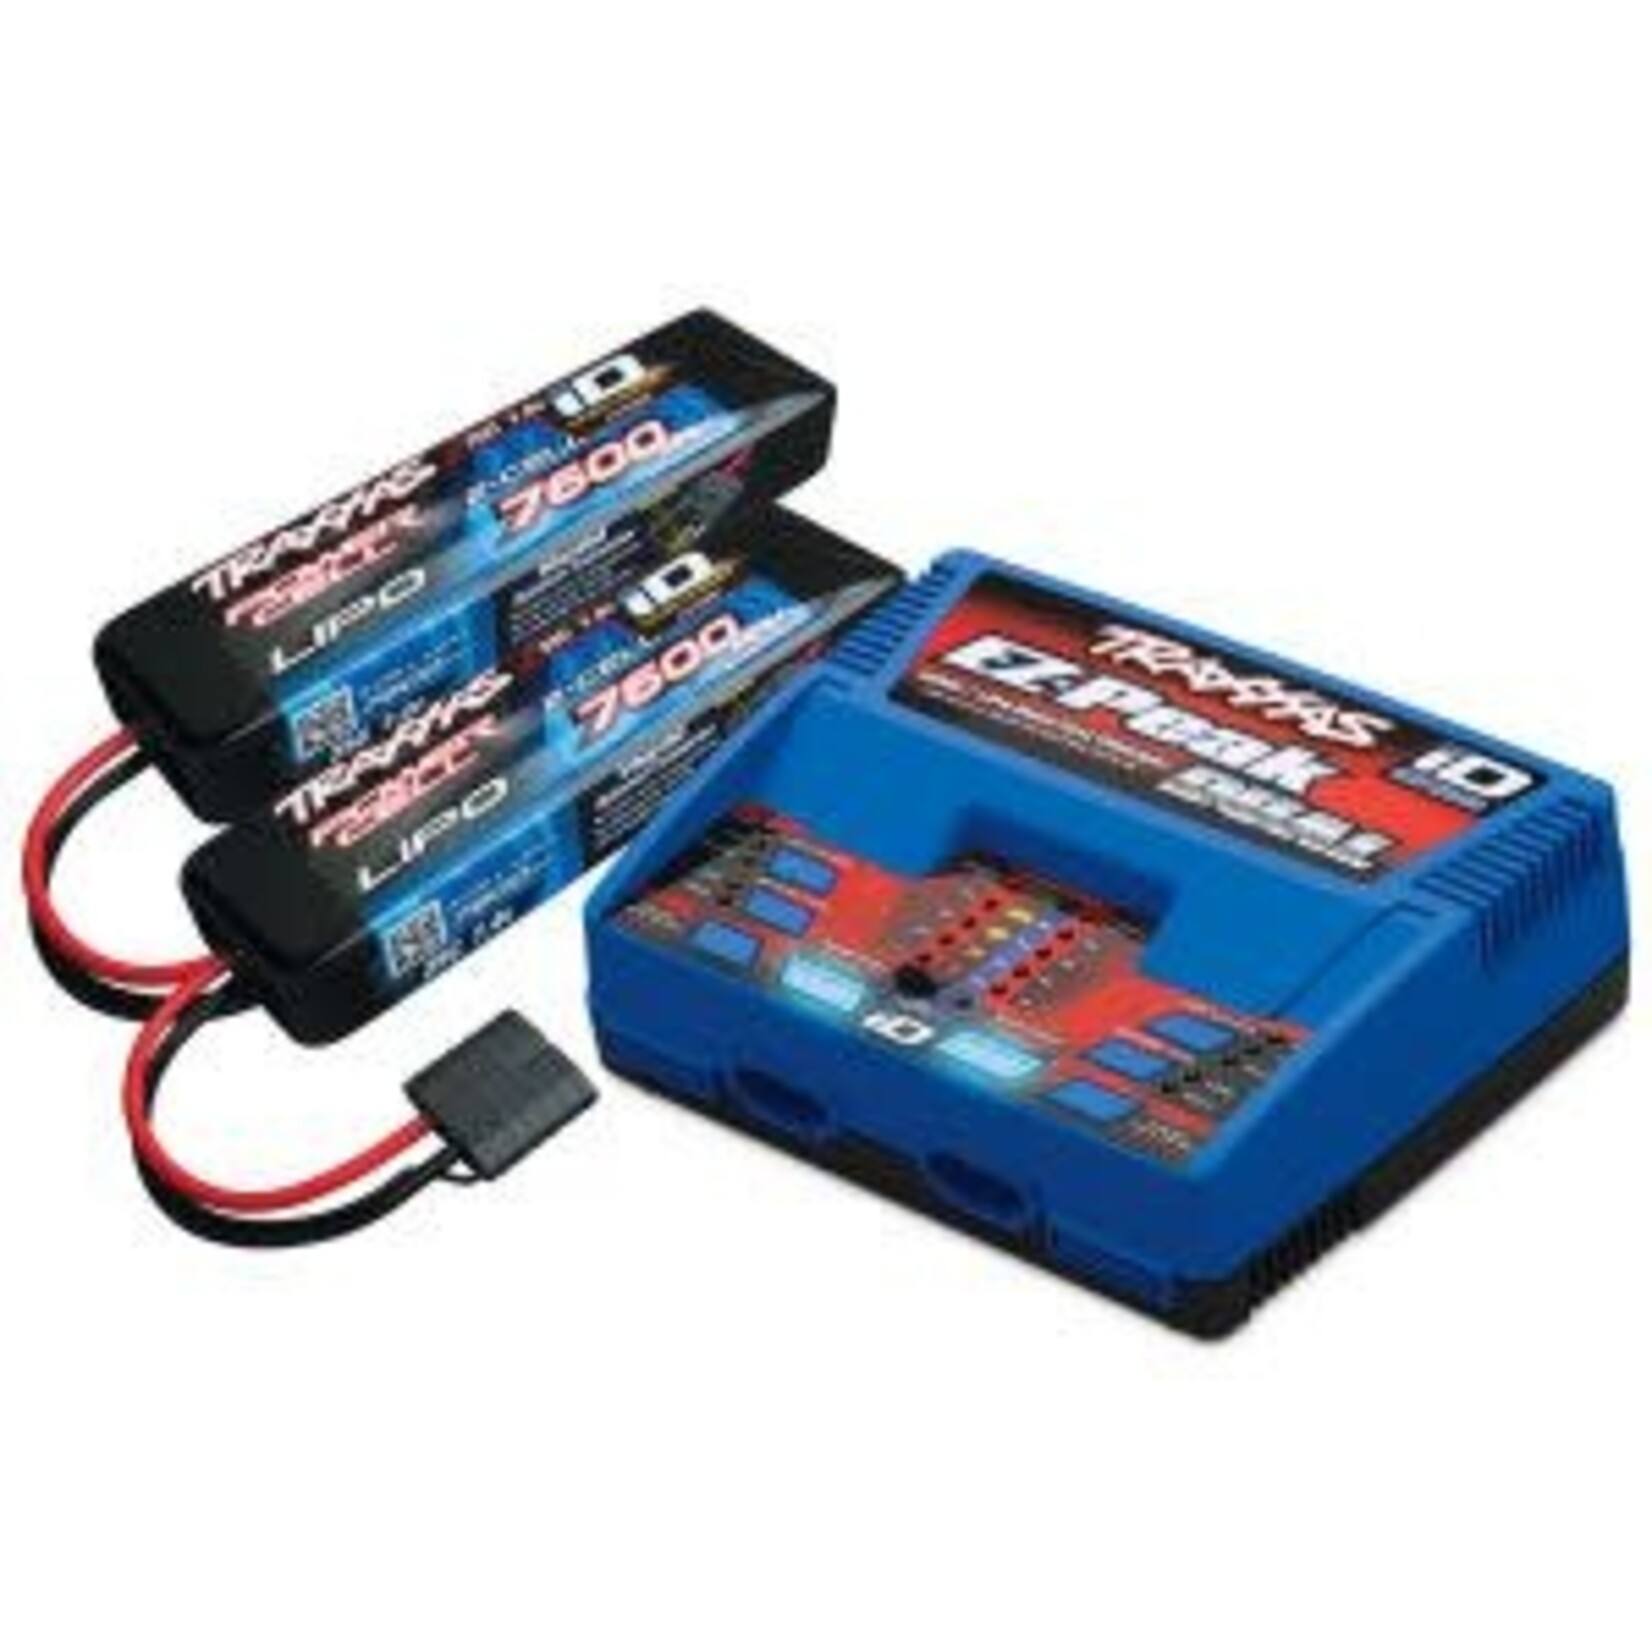 Traxxas 2991 Battery/charger completer pack (includes #2972 Dual iD® charger (1), #2869X 7600mAh 7.4V 2-cell 25C LiPo iD® battery (2))